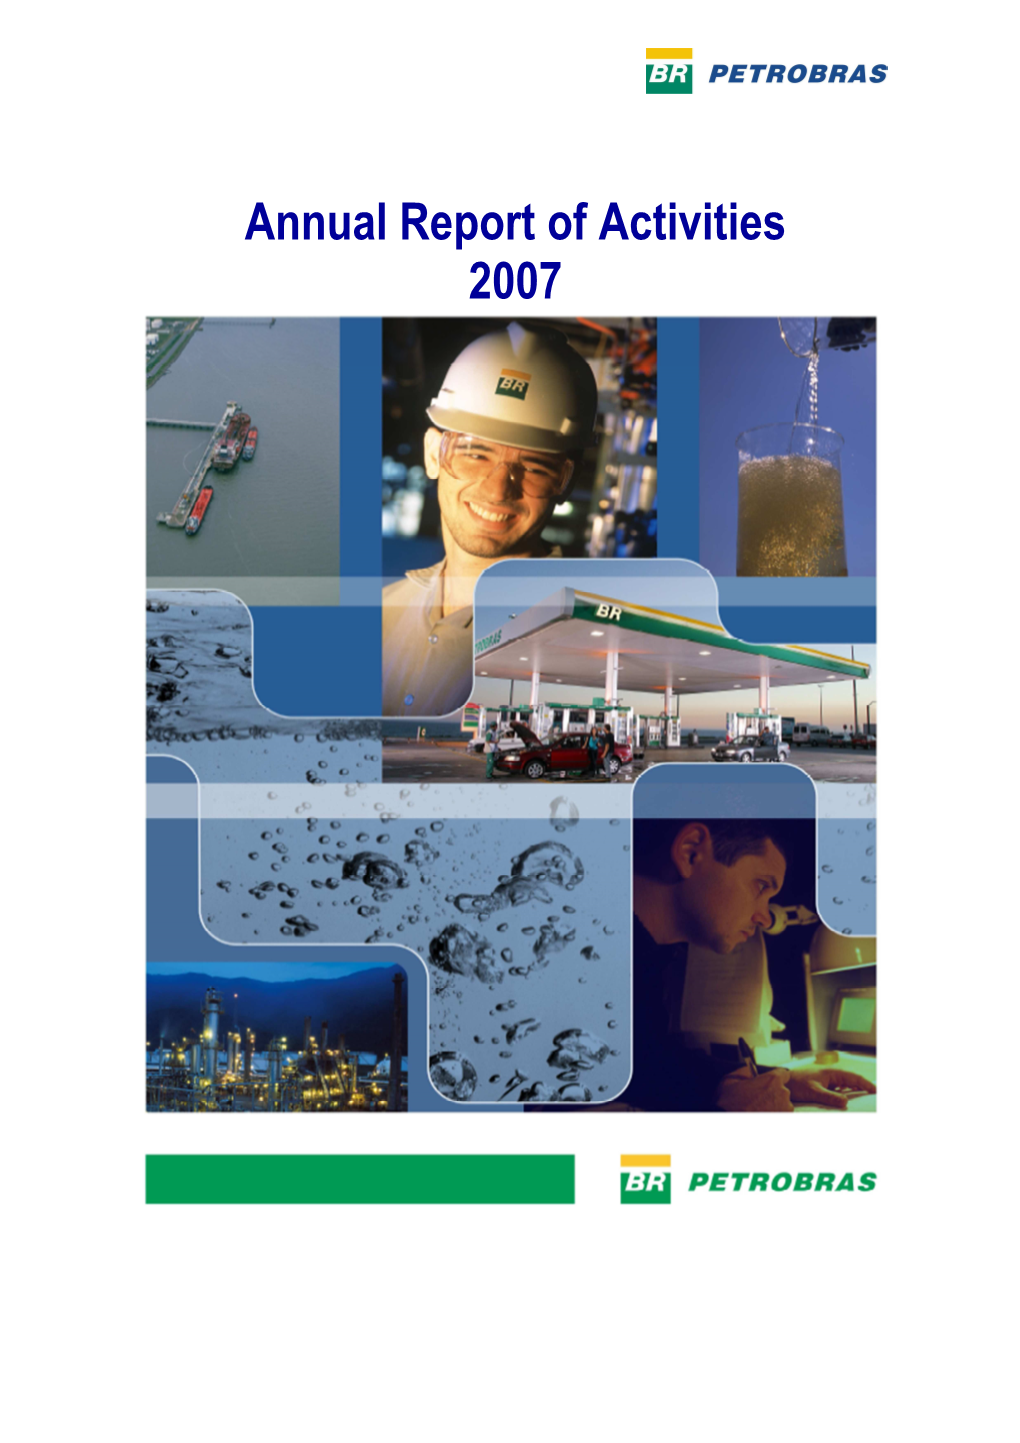 Annual Report of Activities 2007